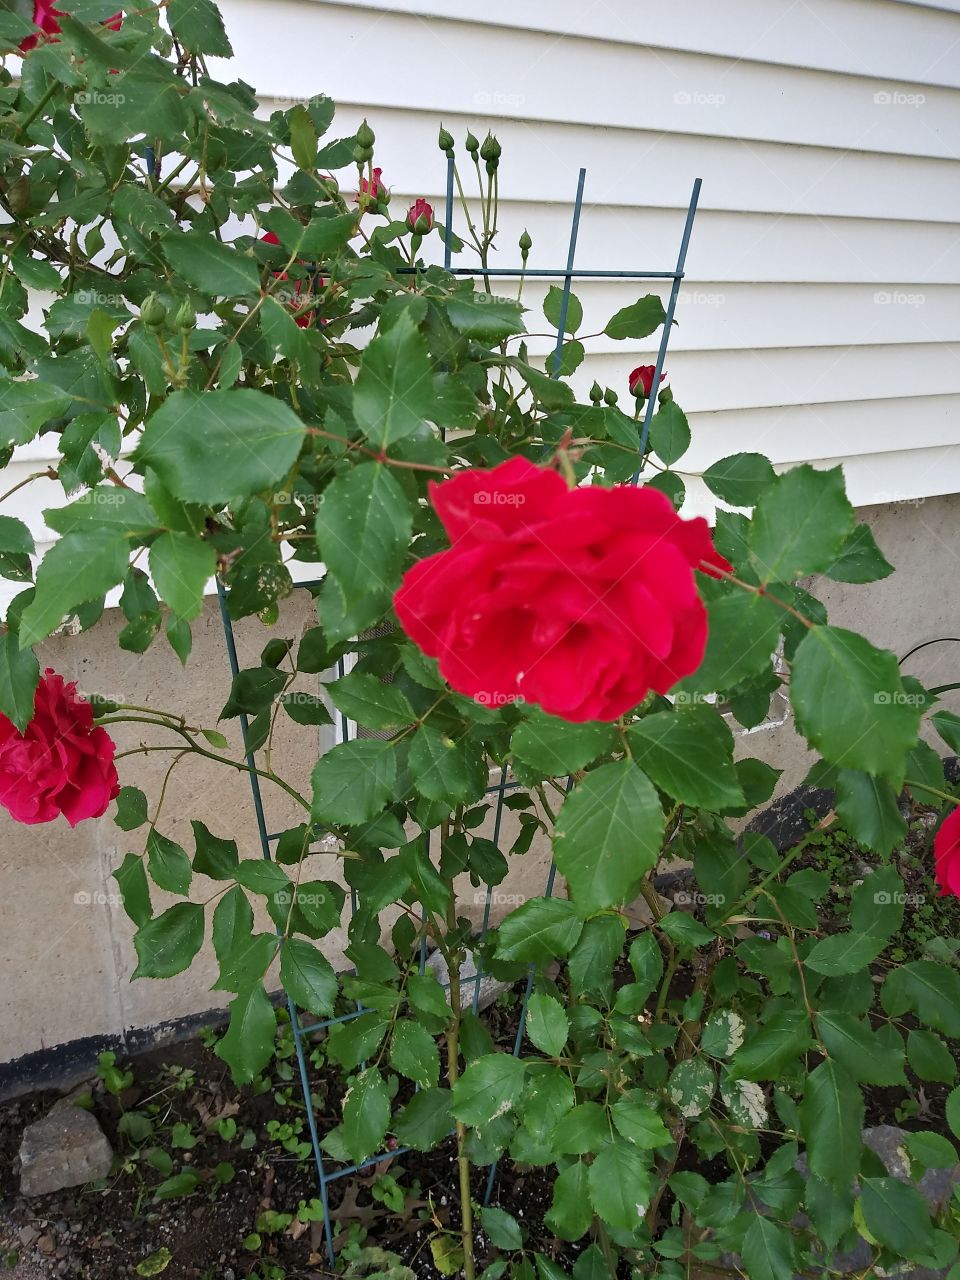 my Mother's Beutiful Roses. Such simple treasures.